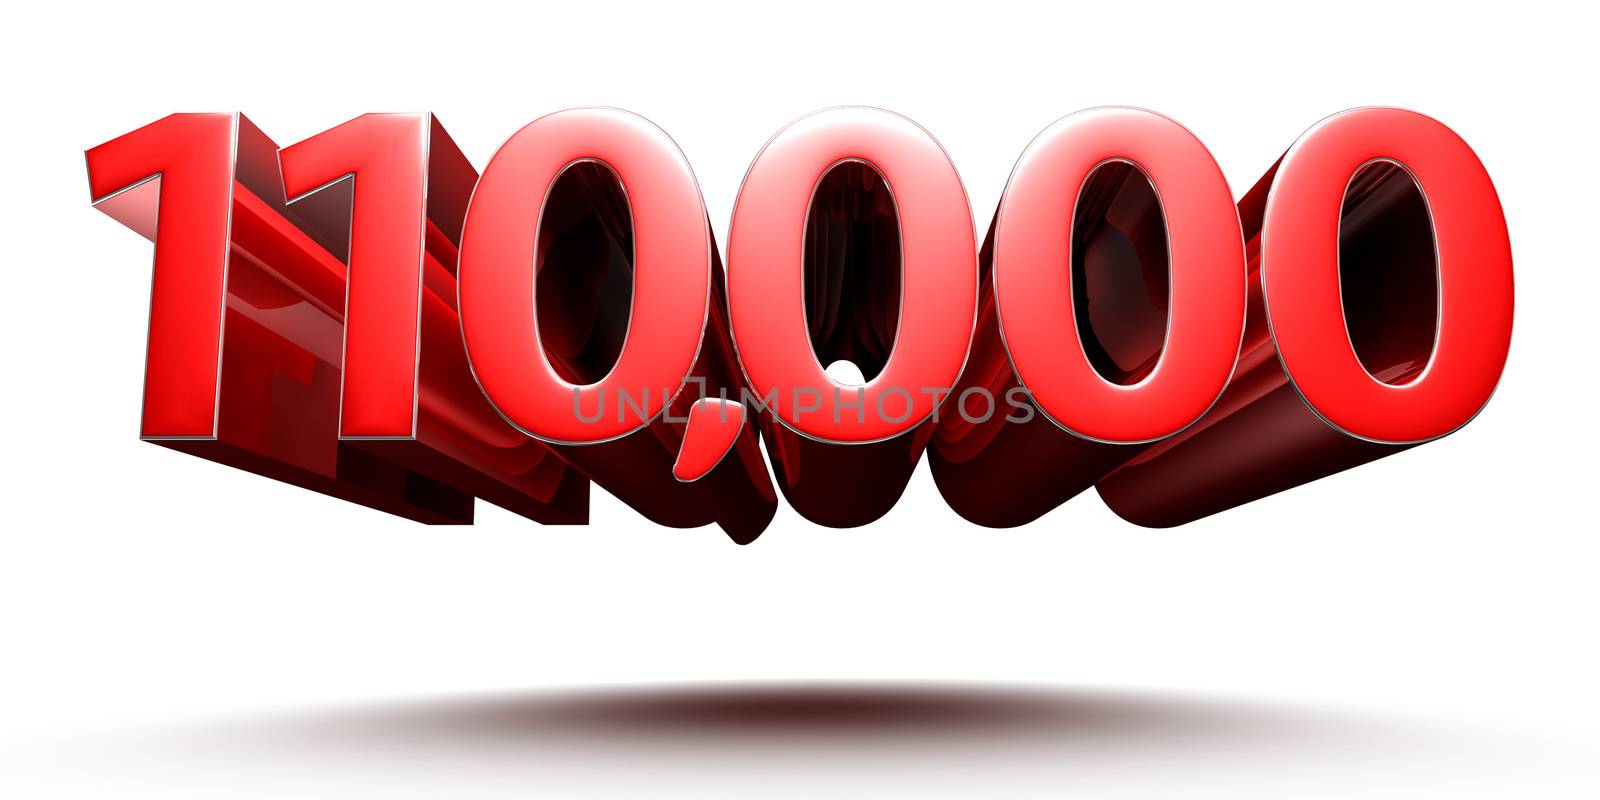 Red numbers 110000 isolated on white background illustration 3D rendering with clipping path.